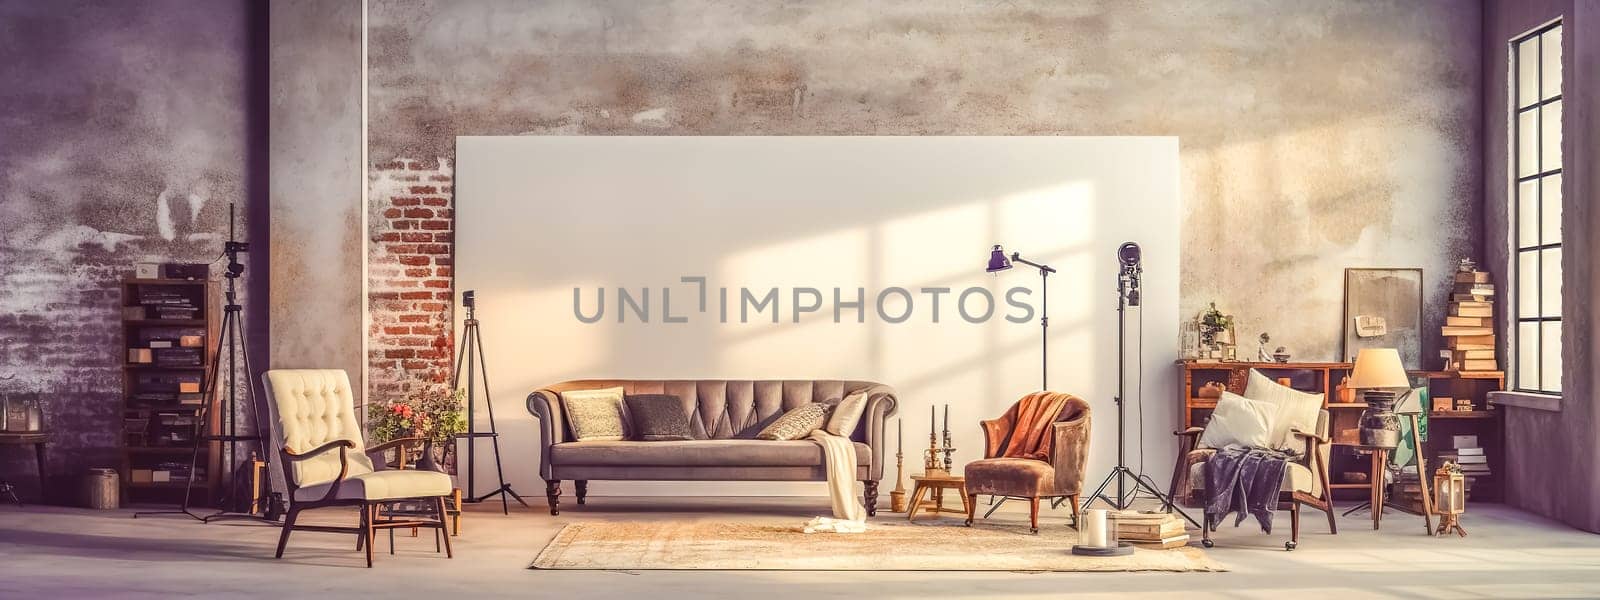 attractive interior with furniture, photo video studio for creative makers, banner.